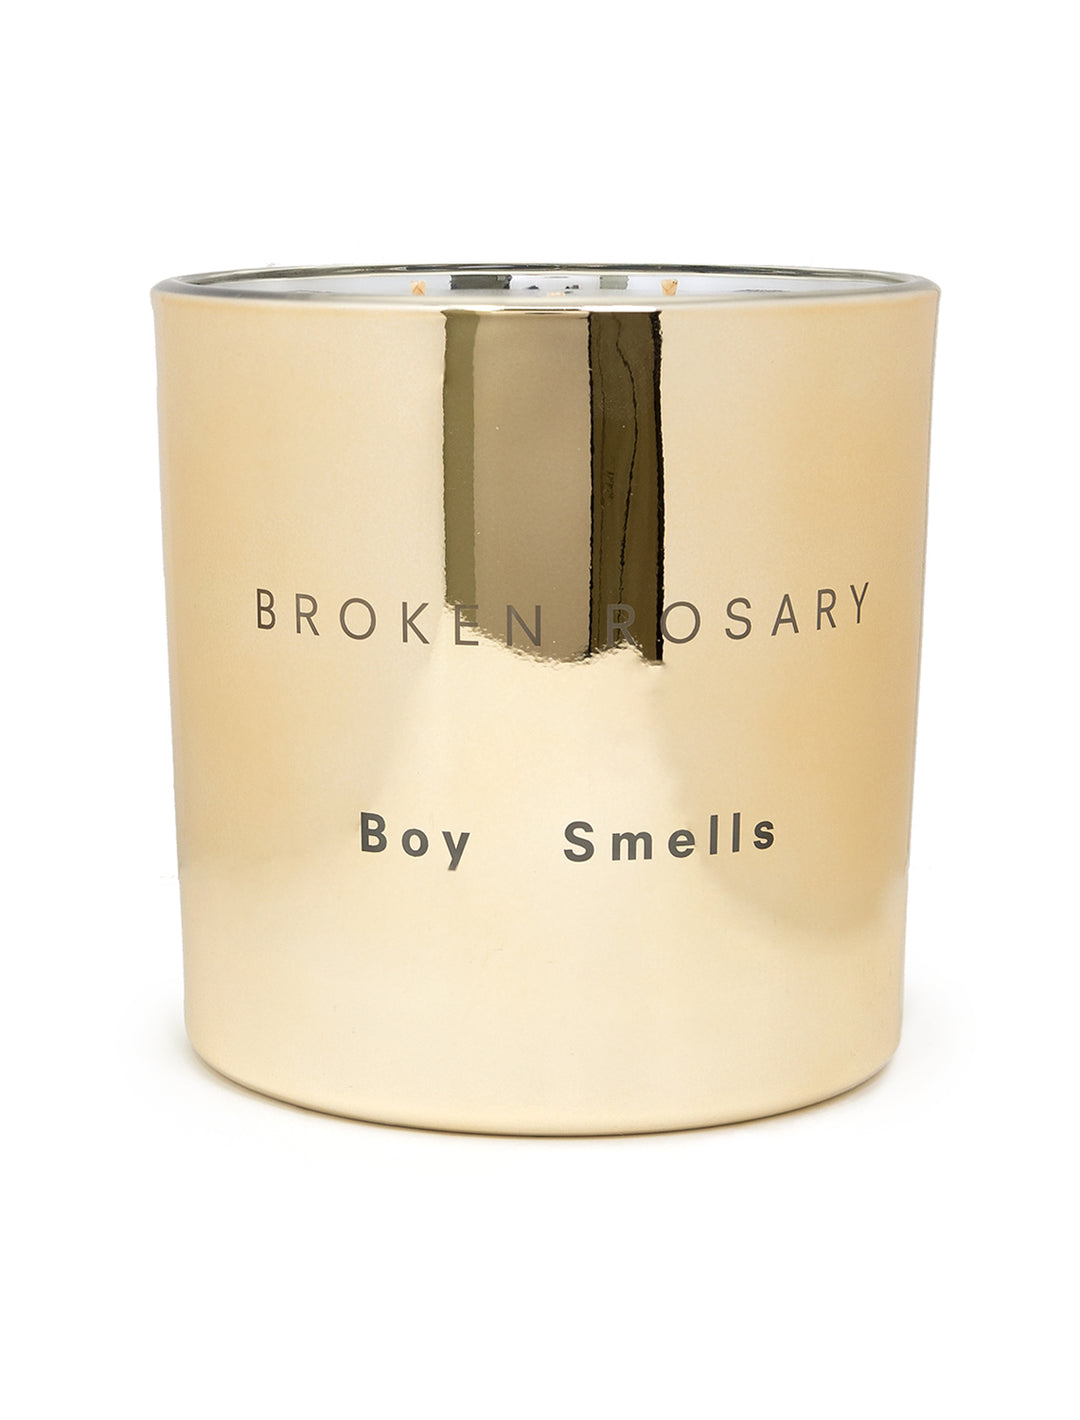 Front view of Boy Smells' broken rosary magnum candle.